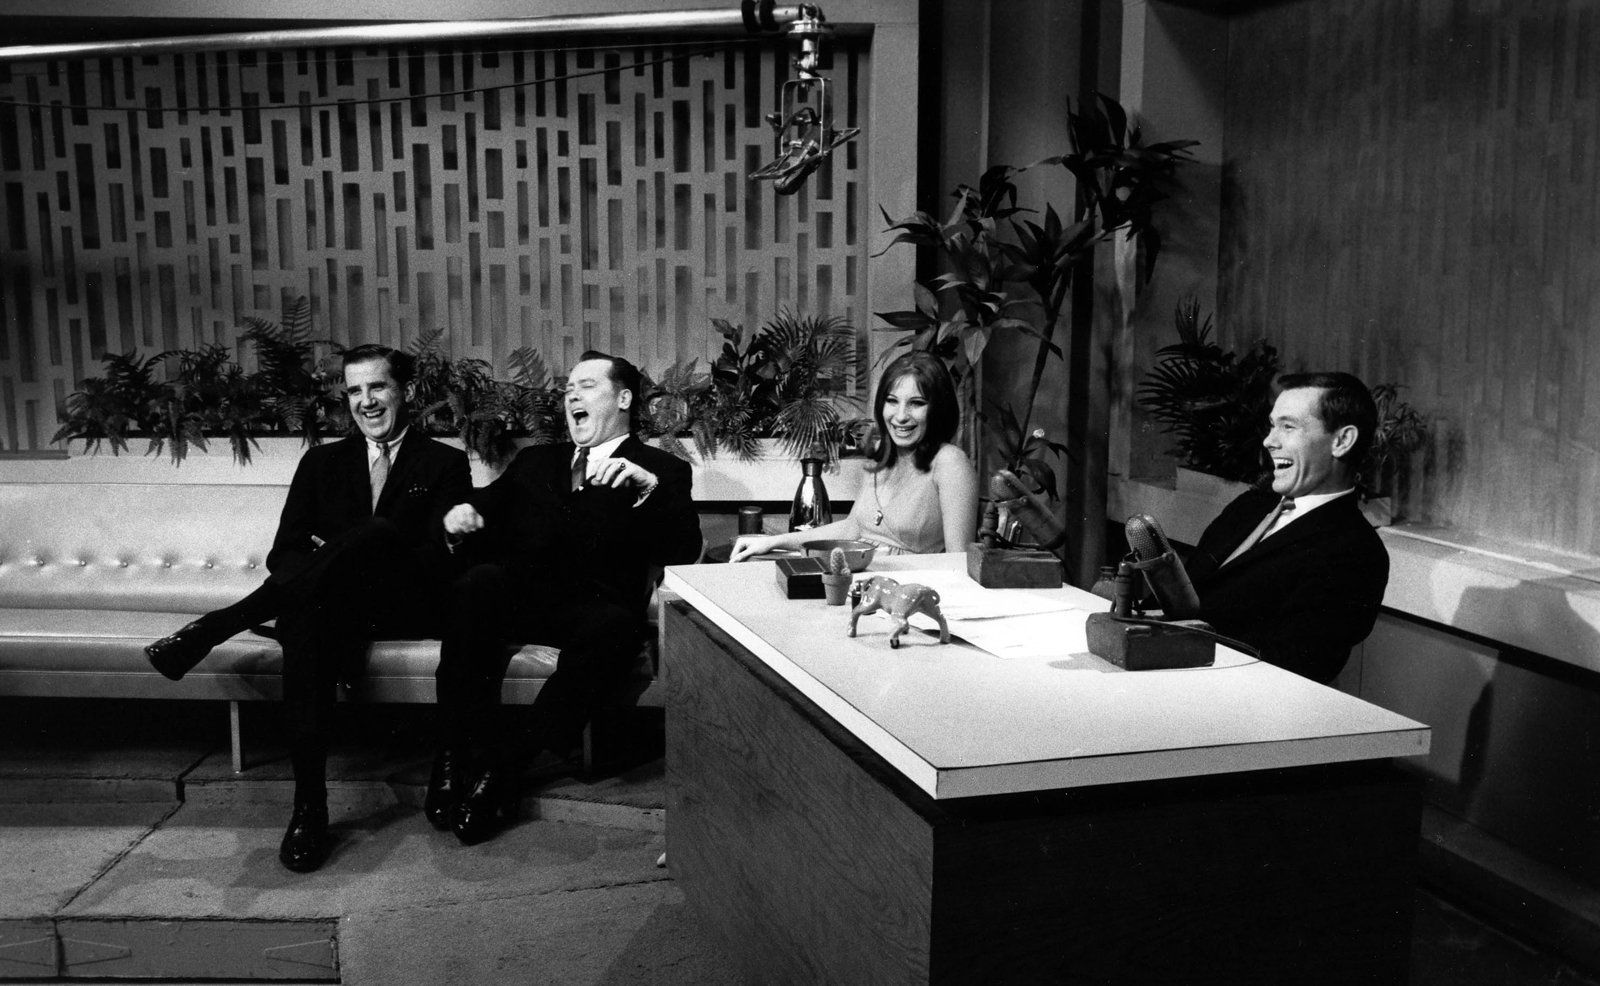 Ed McMahon, 	Mickey Shaughnessy, Barbra Streisand and host Johnny Carson on the Feb. 1, 1963 episode of The Tonight Show.